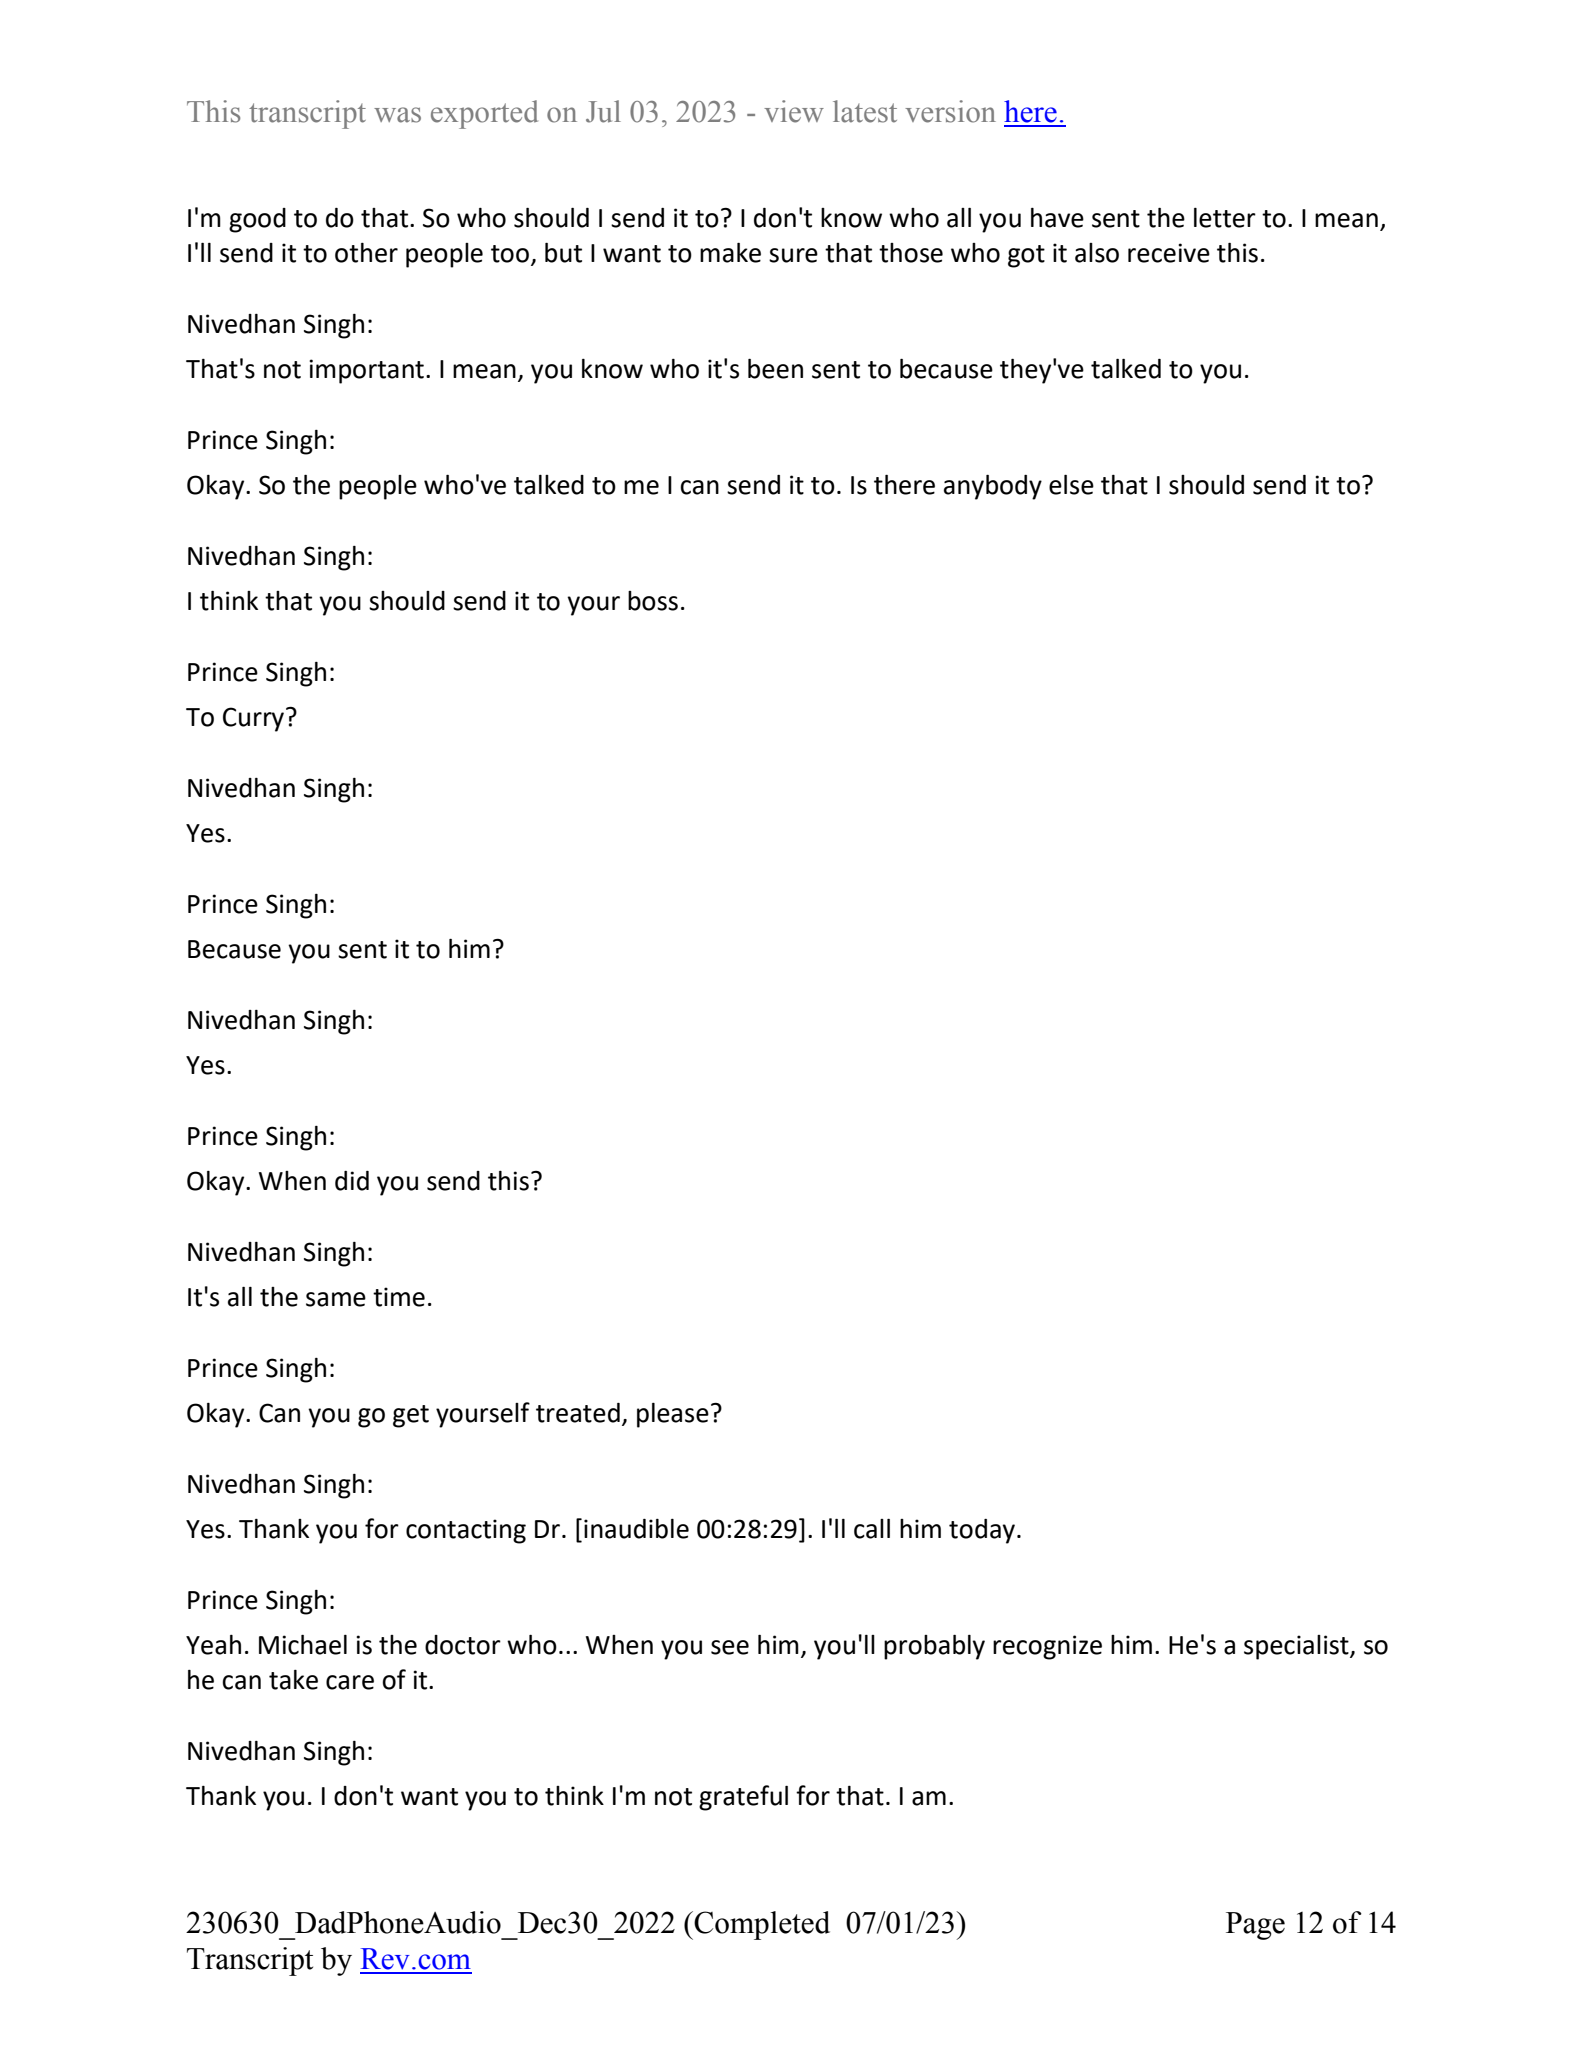 December 30th, 2022 phone call transcript - Page 12